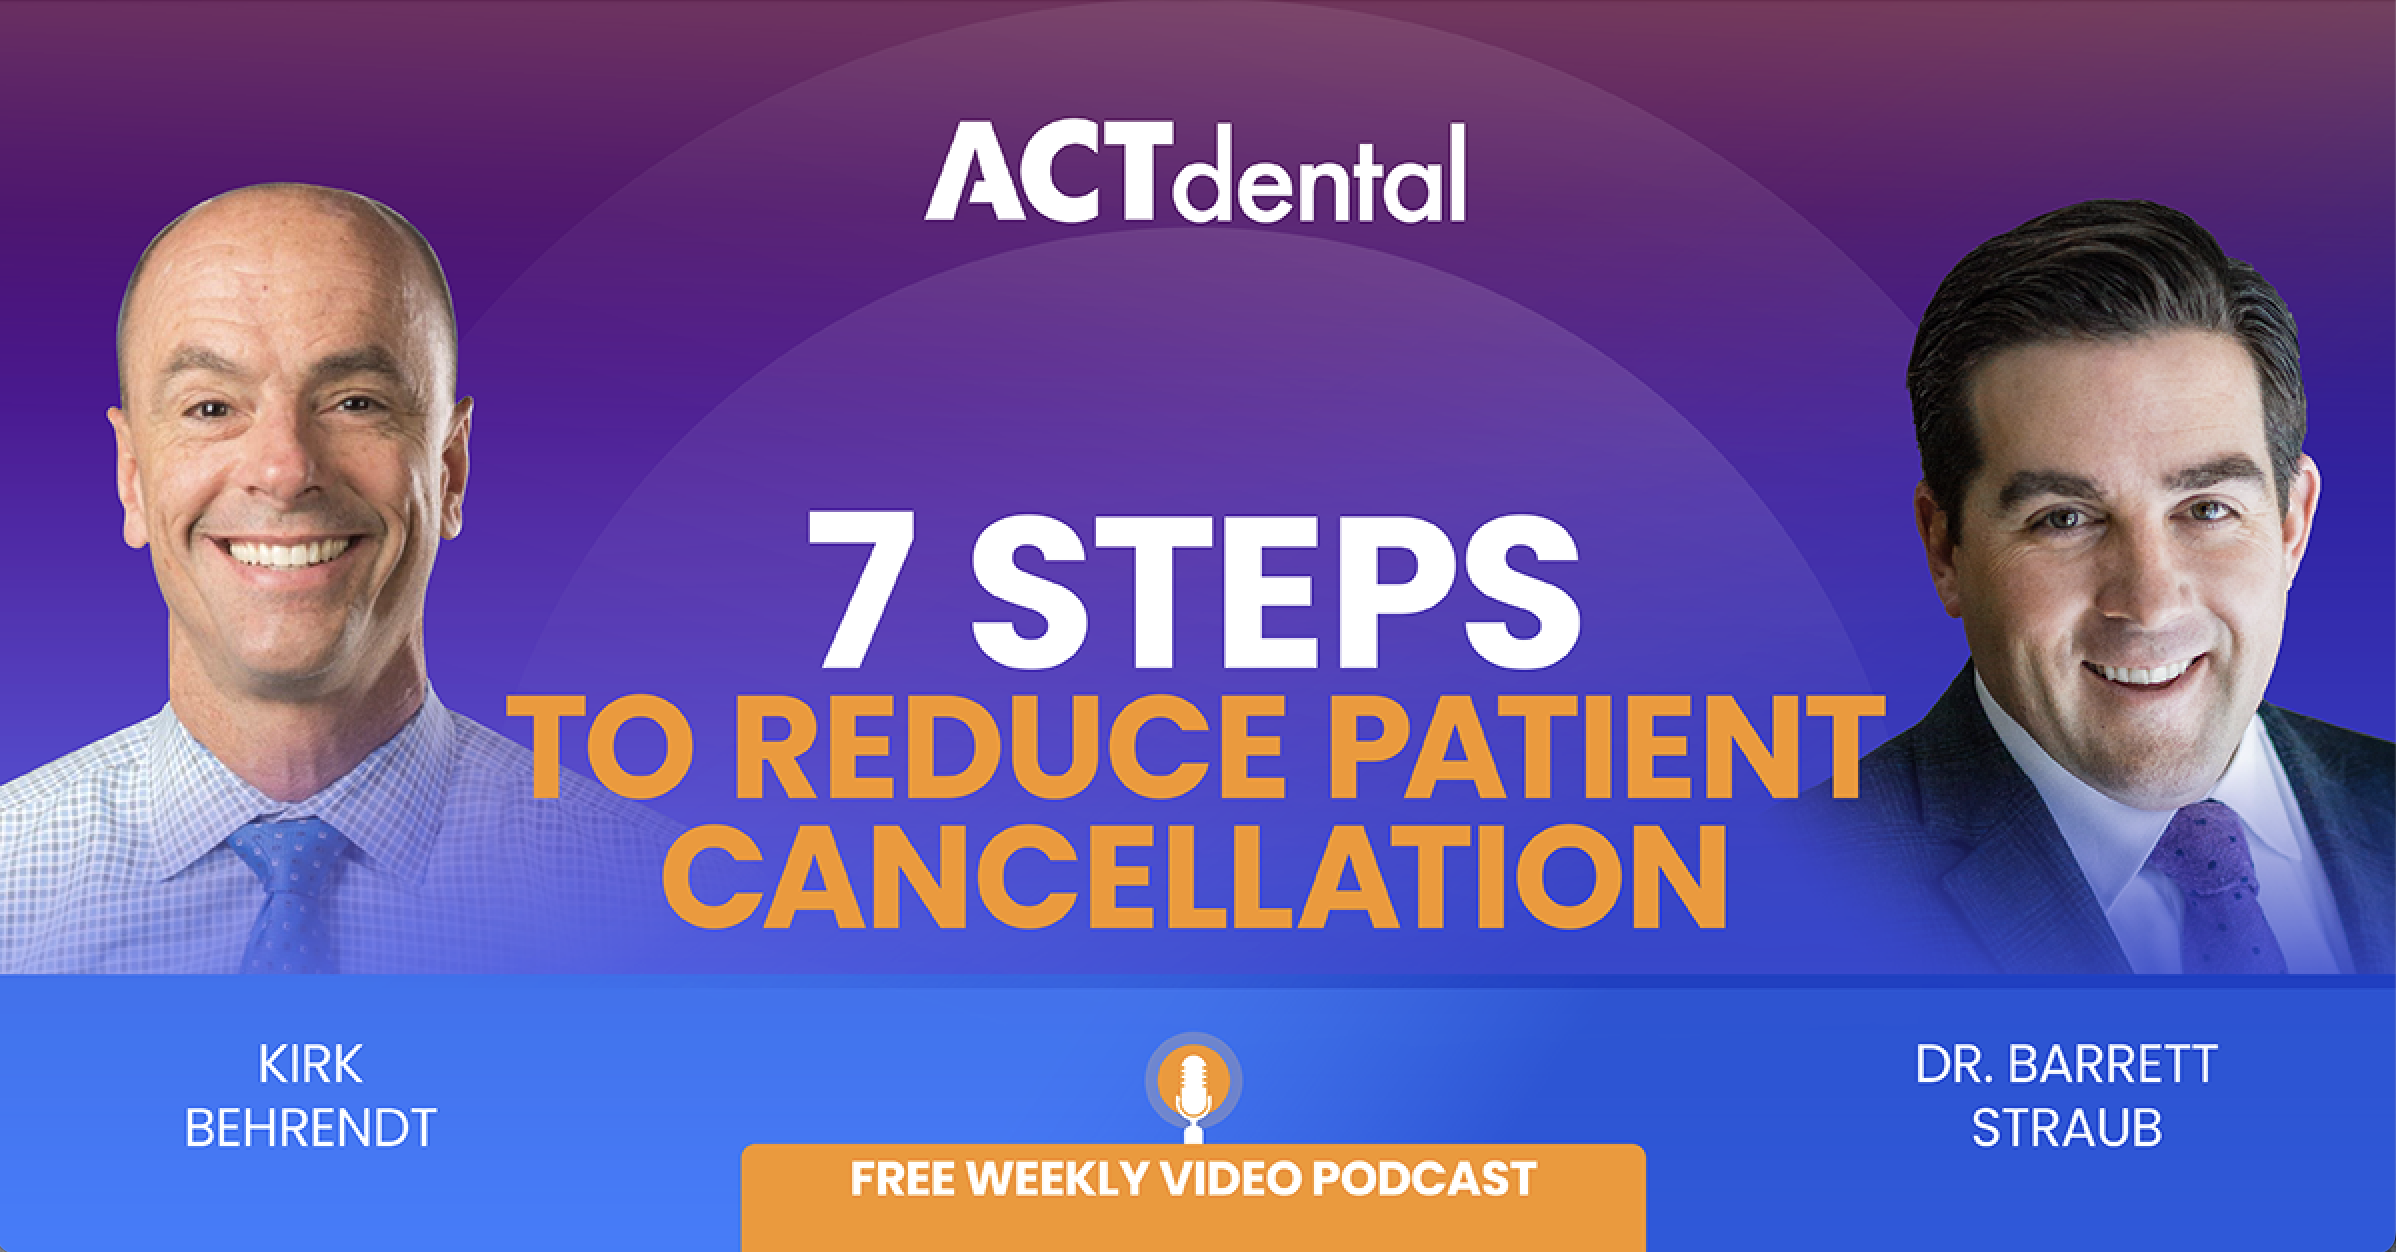 1_9_23 7 Proven Steps to reudce patient cancellations